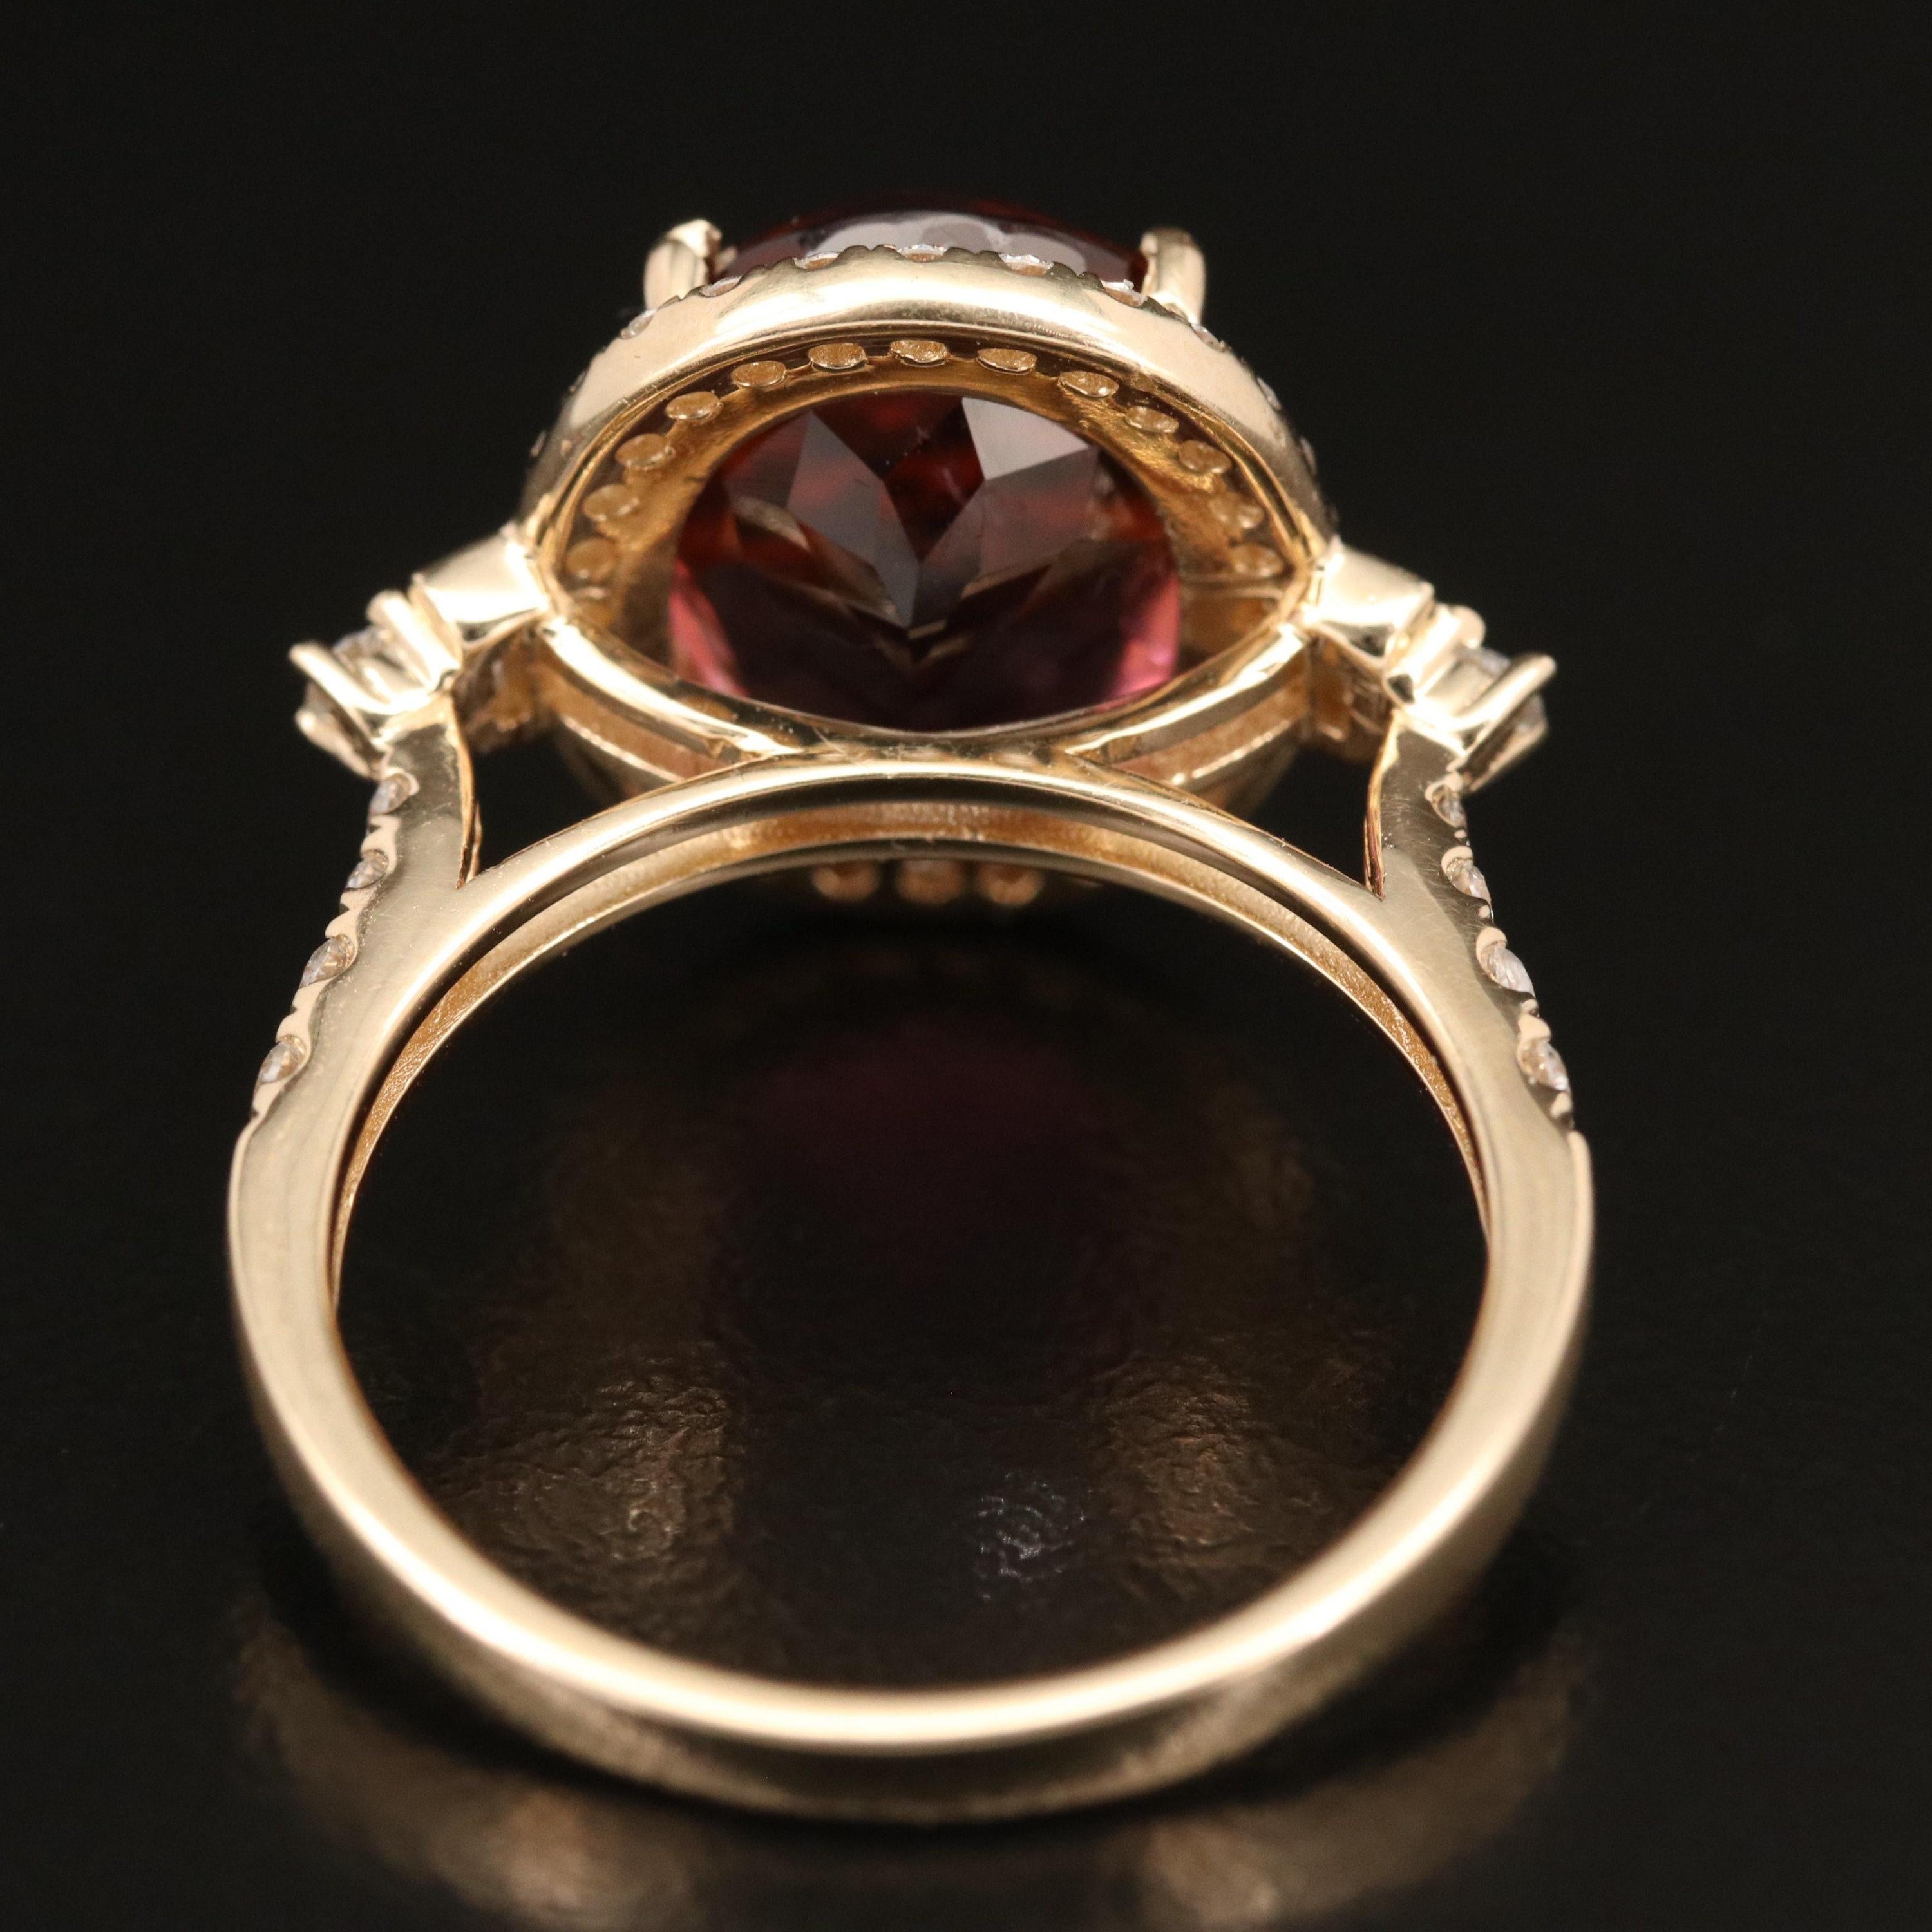 For Sale:  6.3 Carat Oval Cut Rubellite Tourmaline Bridal Promise Ring Halo Tourmaline Ring 4